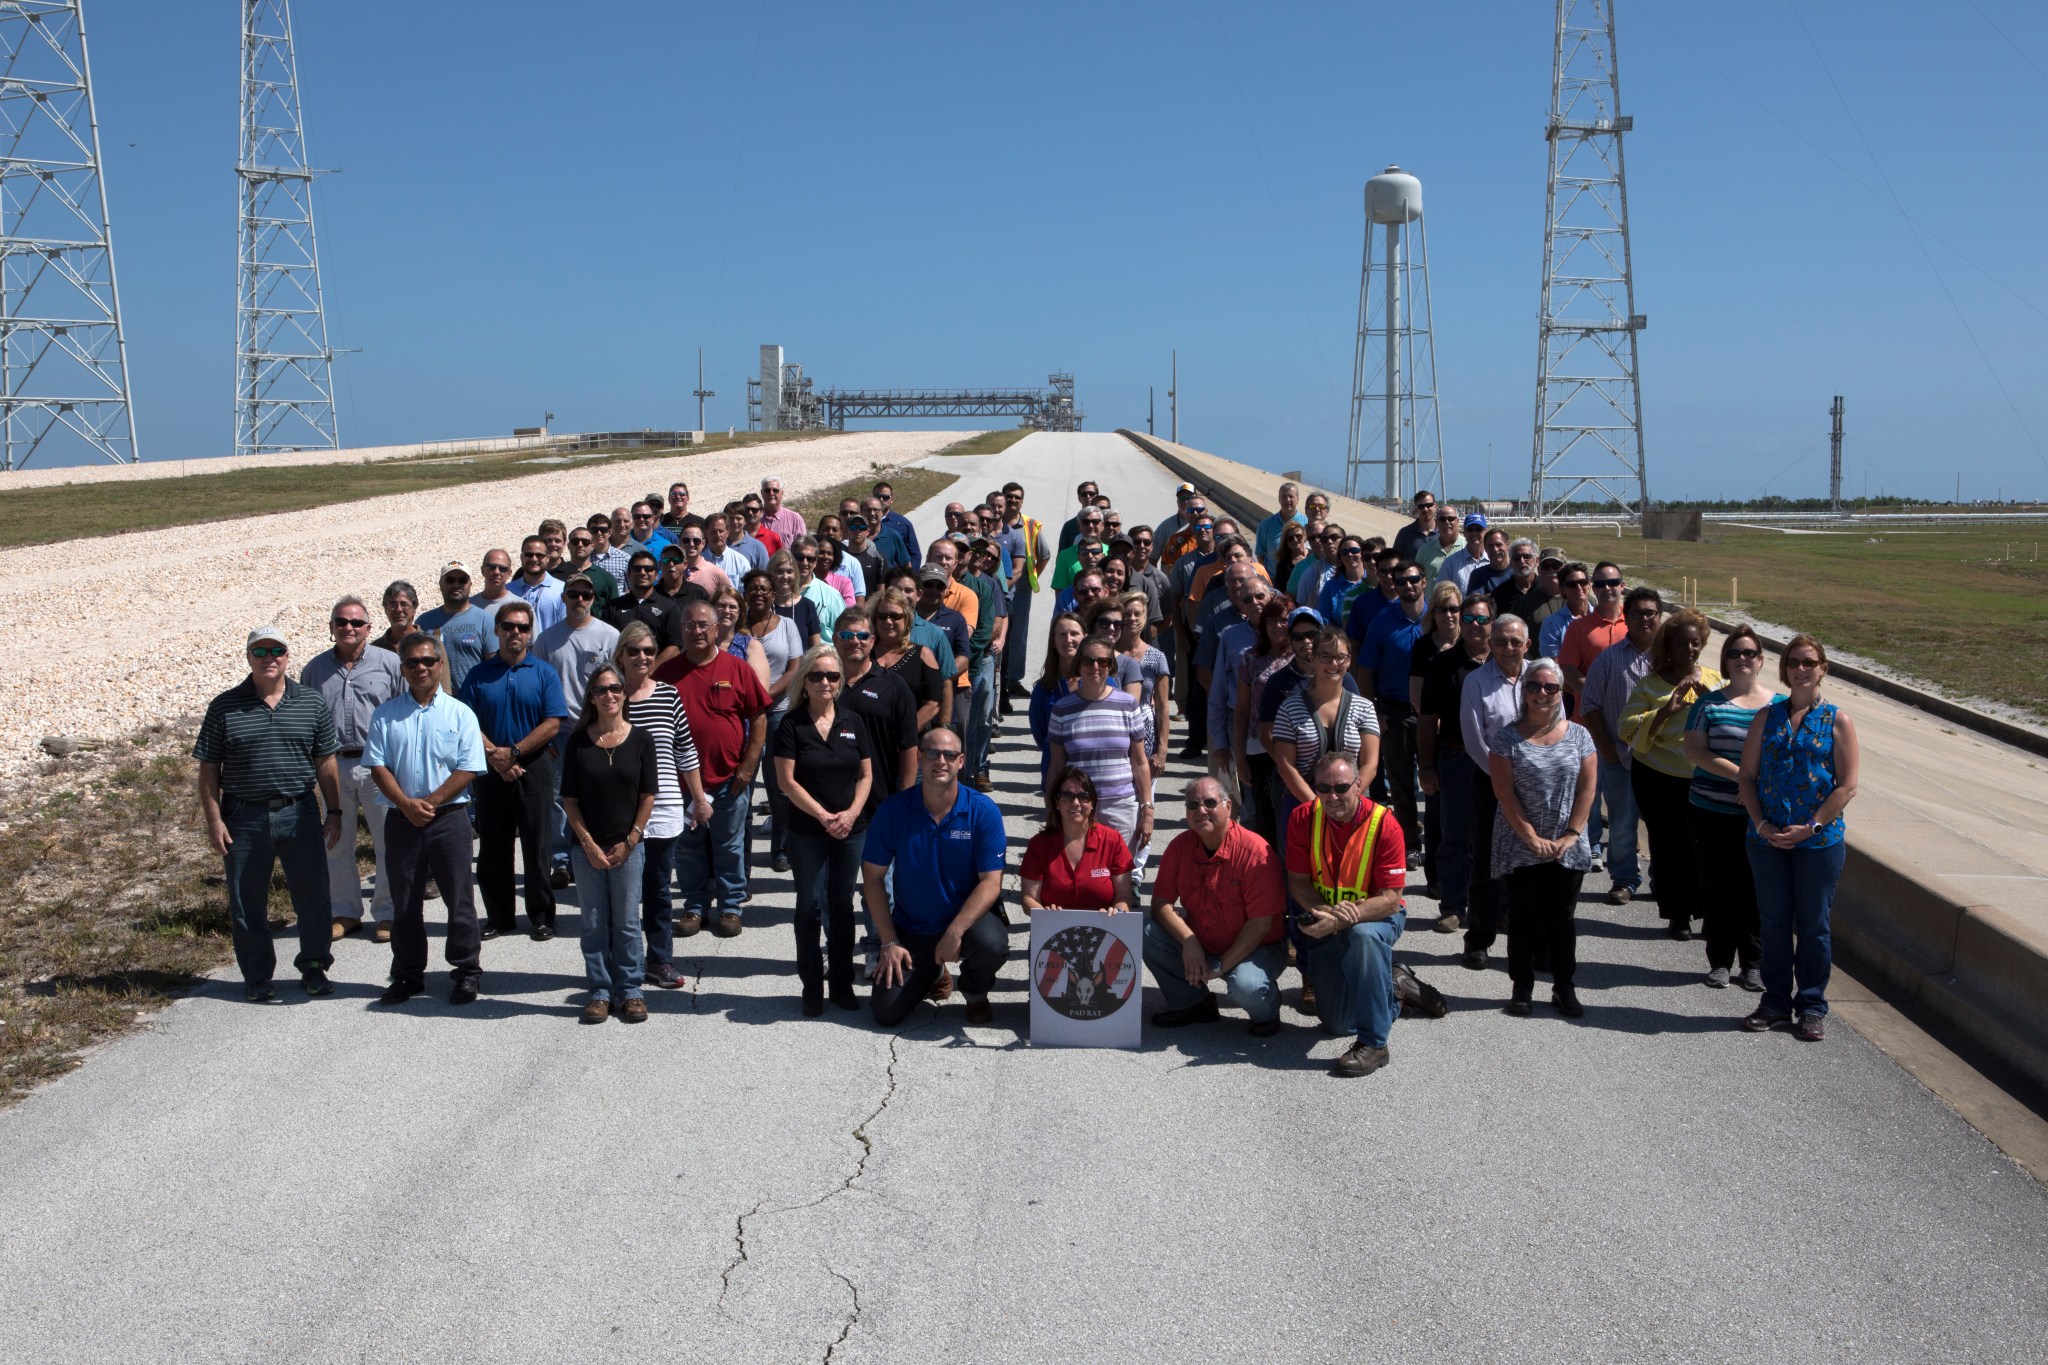 Launch Complex 39B current and past NASA and contractor workers gather to mark the 50th anniversary of pad B. 